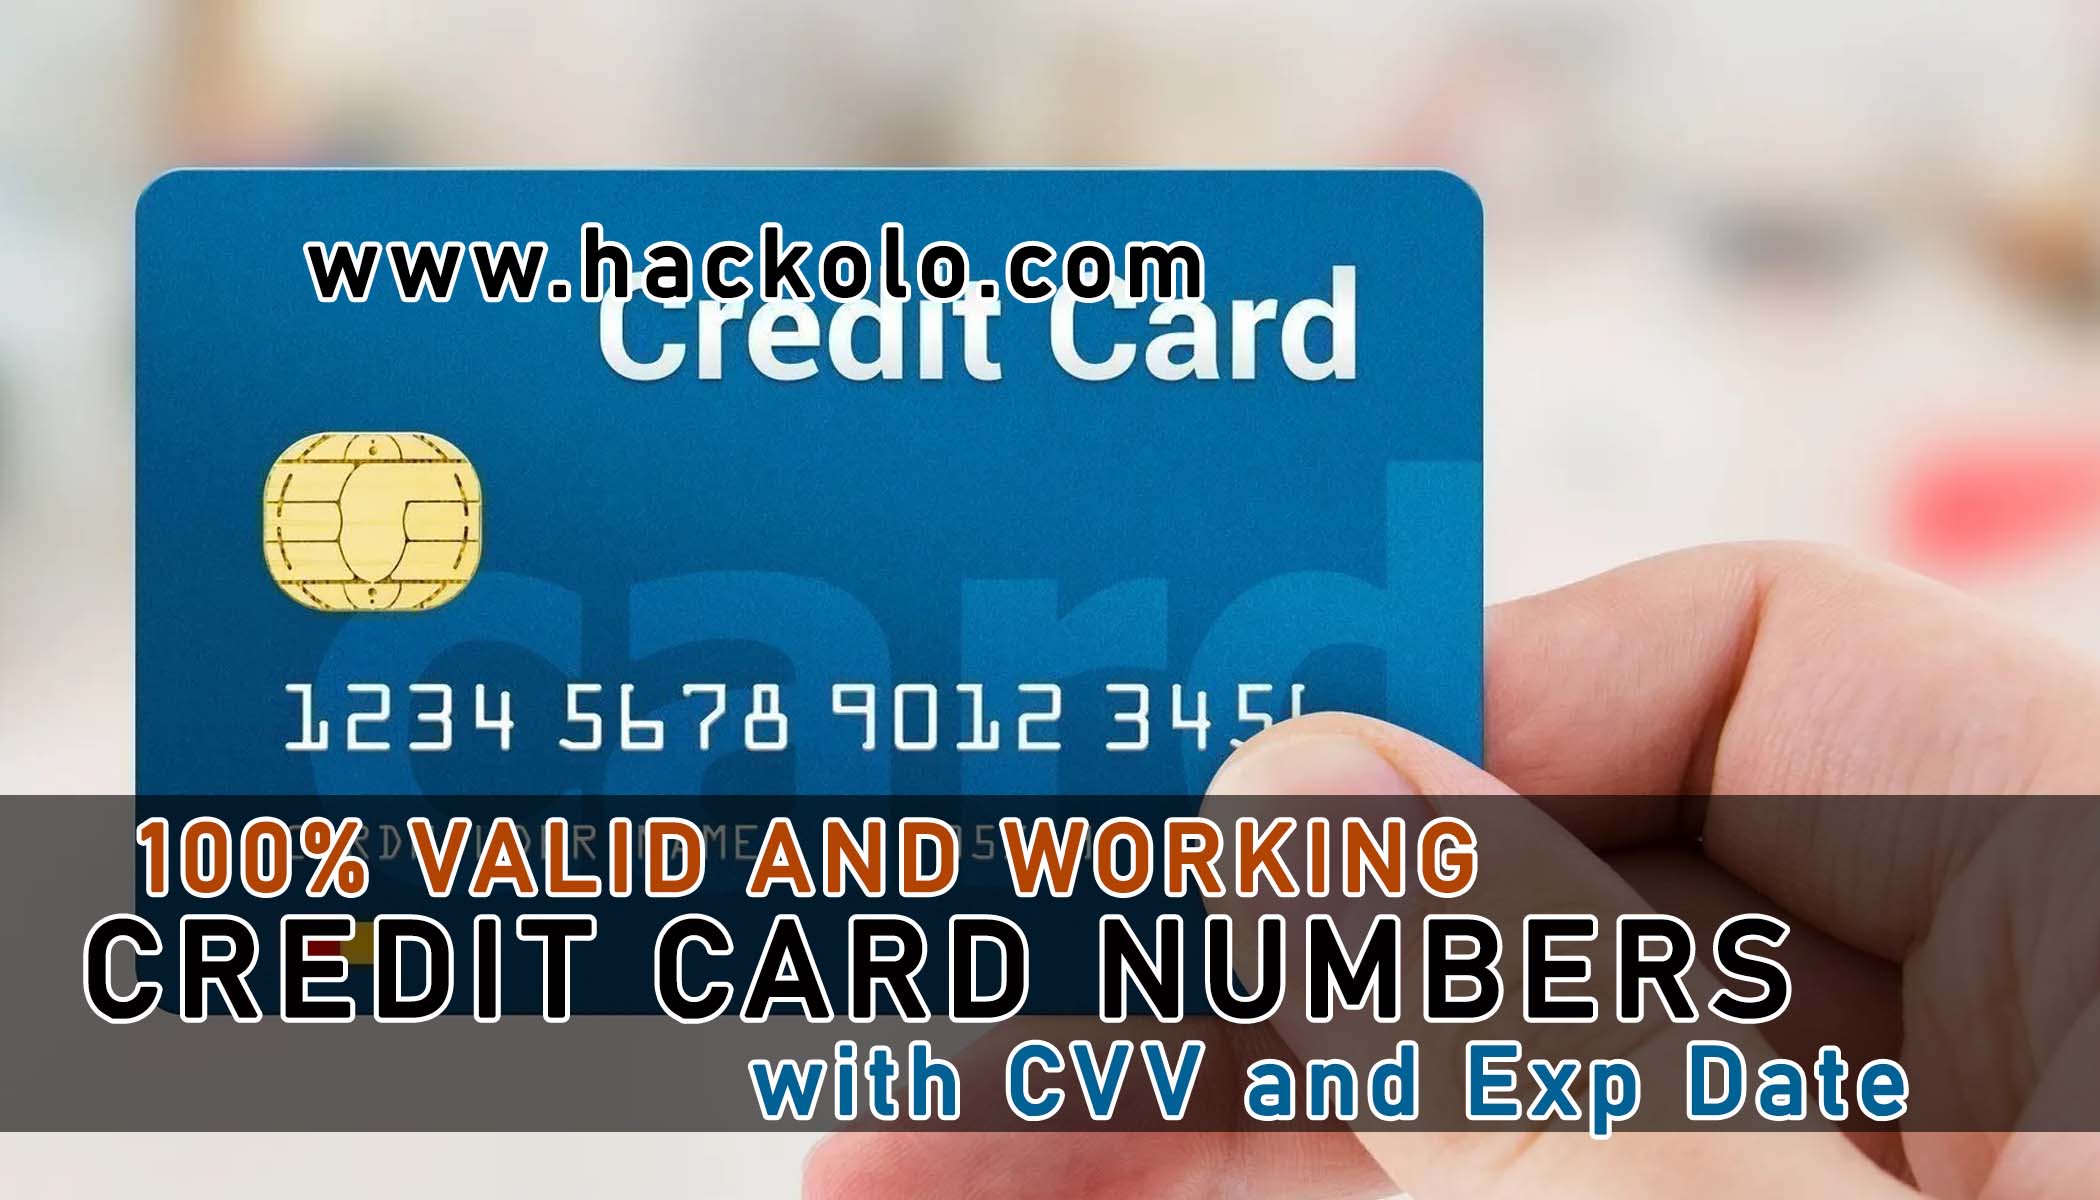 method-get-a-valid-credit-card-numbers-that-work-online-2023-hacks-and-glitches-portal